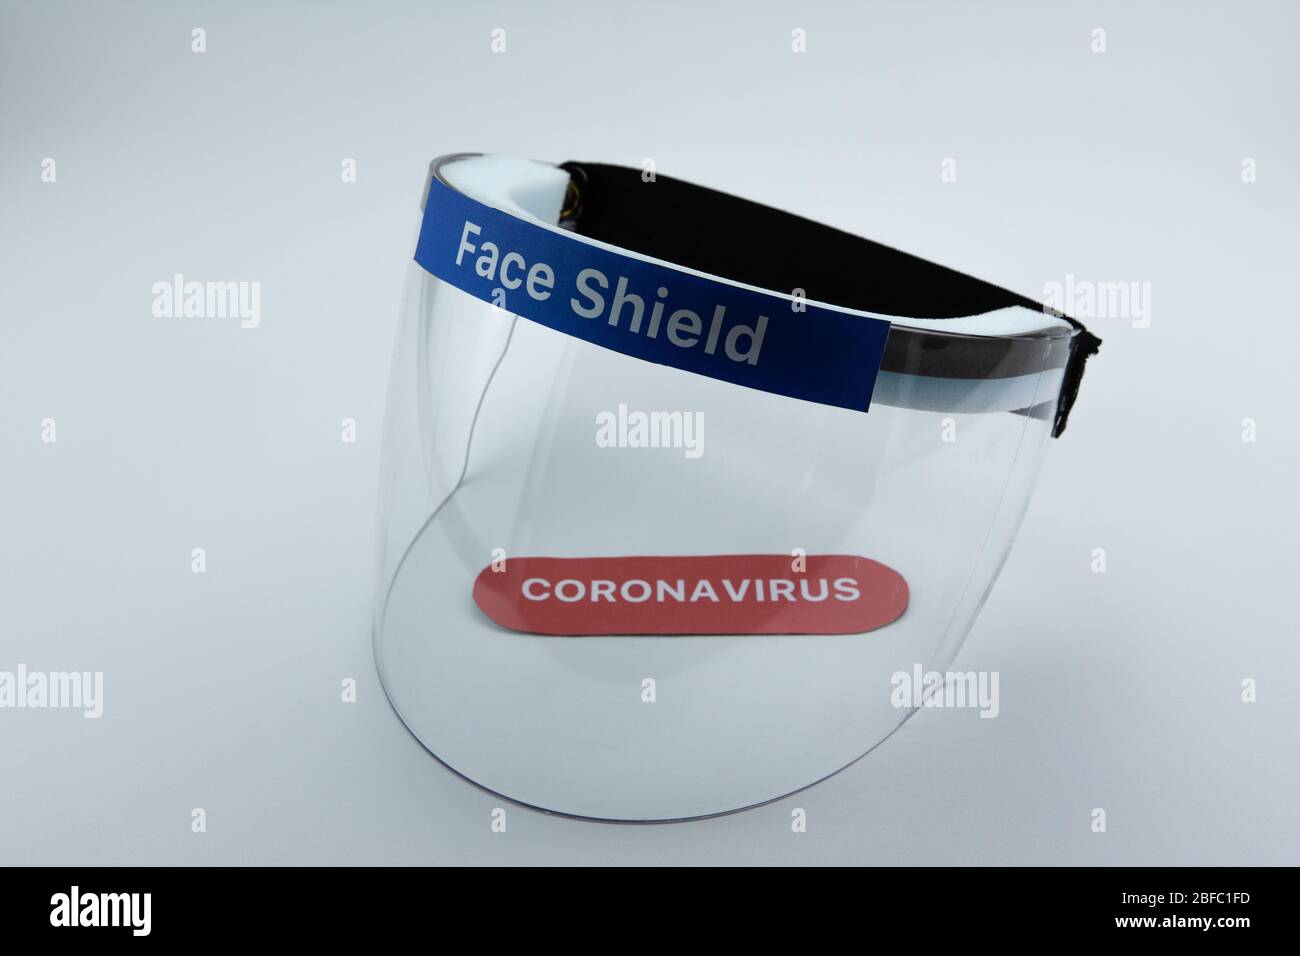 Face shield on a white background. Pandemic COVID-19 virus and protection against coronavirus concept. Stock Photo